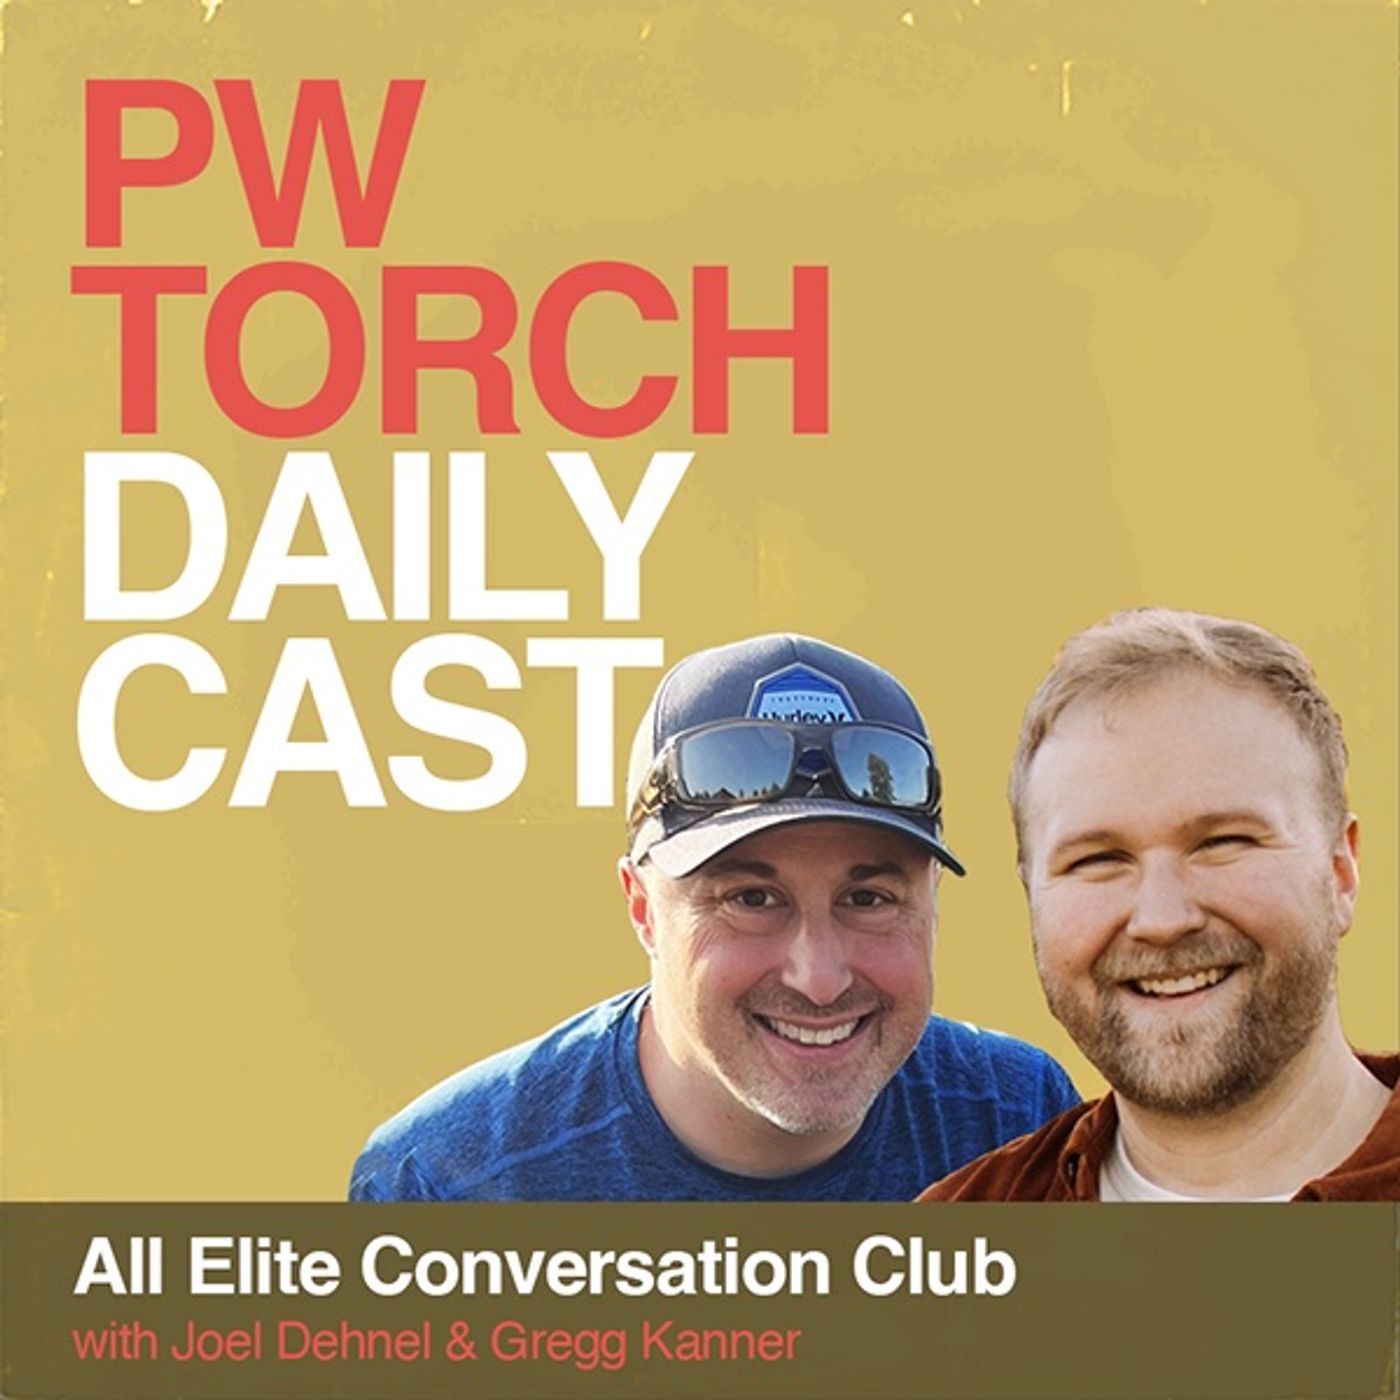 All Elite Conversation Club - Dehnel & Kanner discuss the continued Elite takeover of Dynamite, Kenny Omega's impending surgery and return